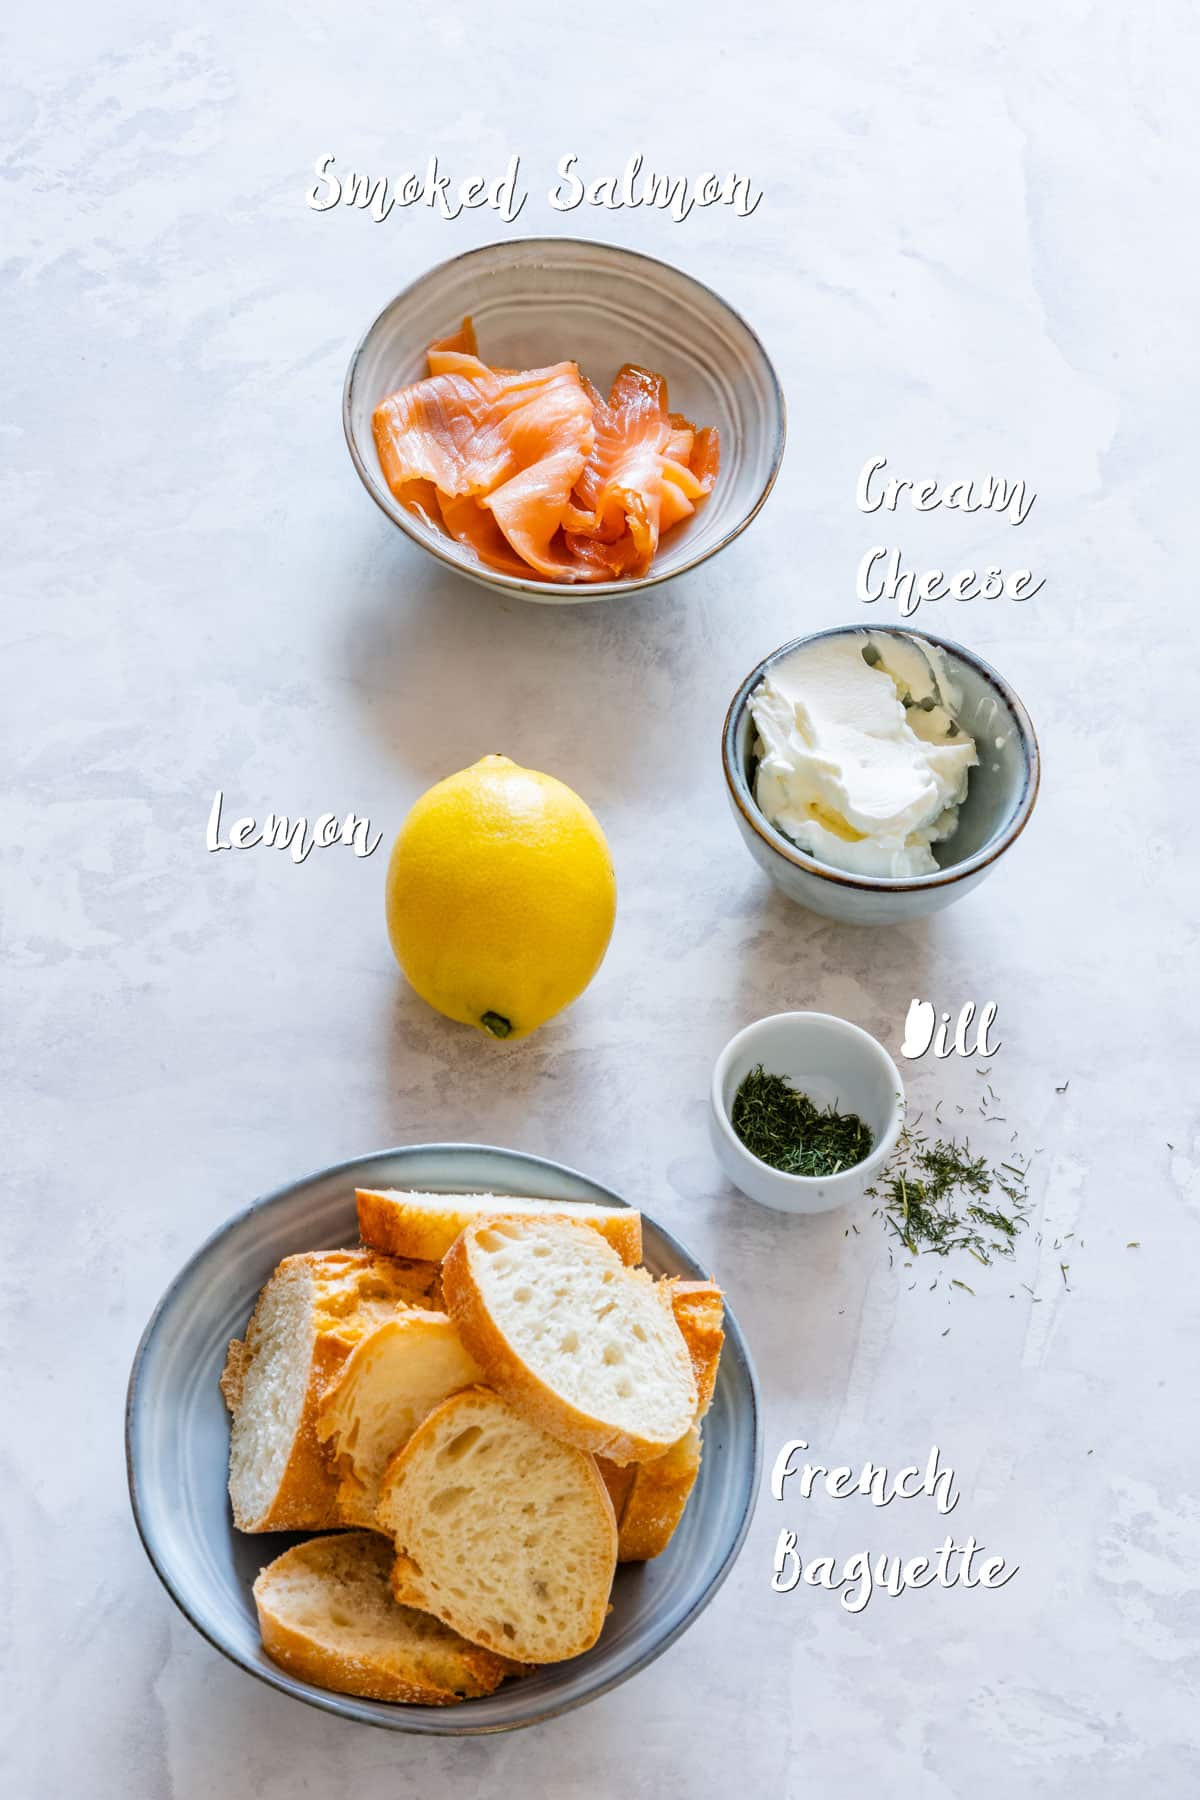 Ingredients of smoked salmon crostini: smoked salmon, cream cheese, French baguette, lemon and dill.